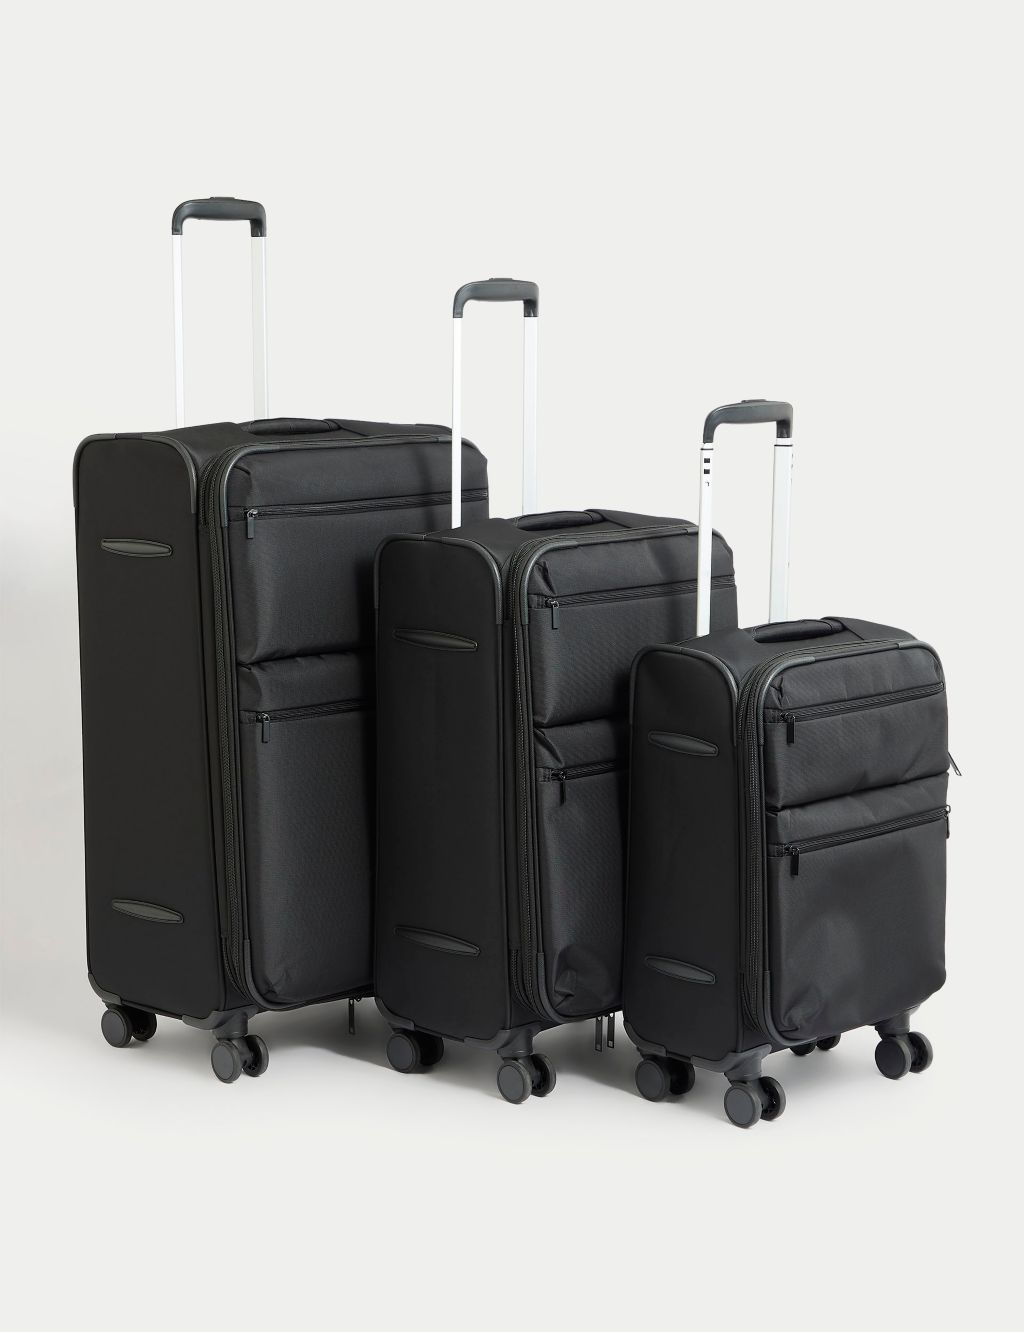 Set of 3 Montreal 4 Wheel Soft Suitcases